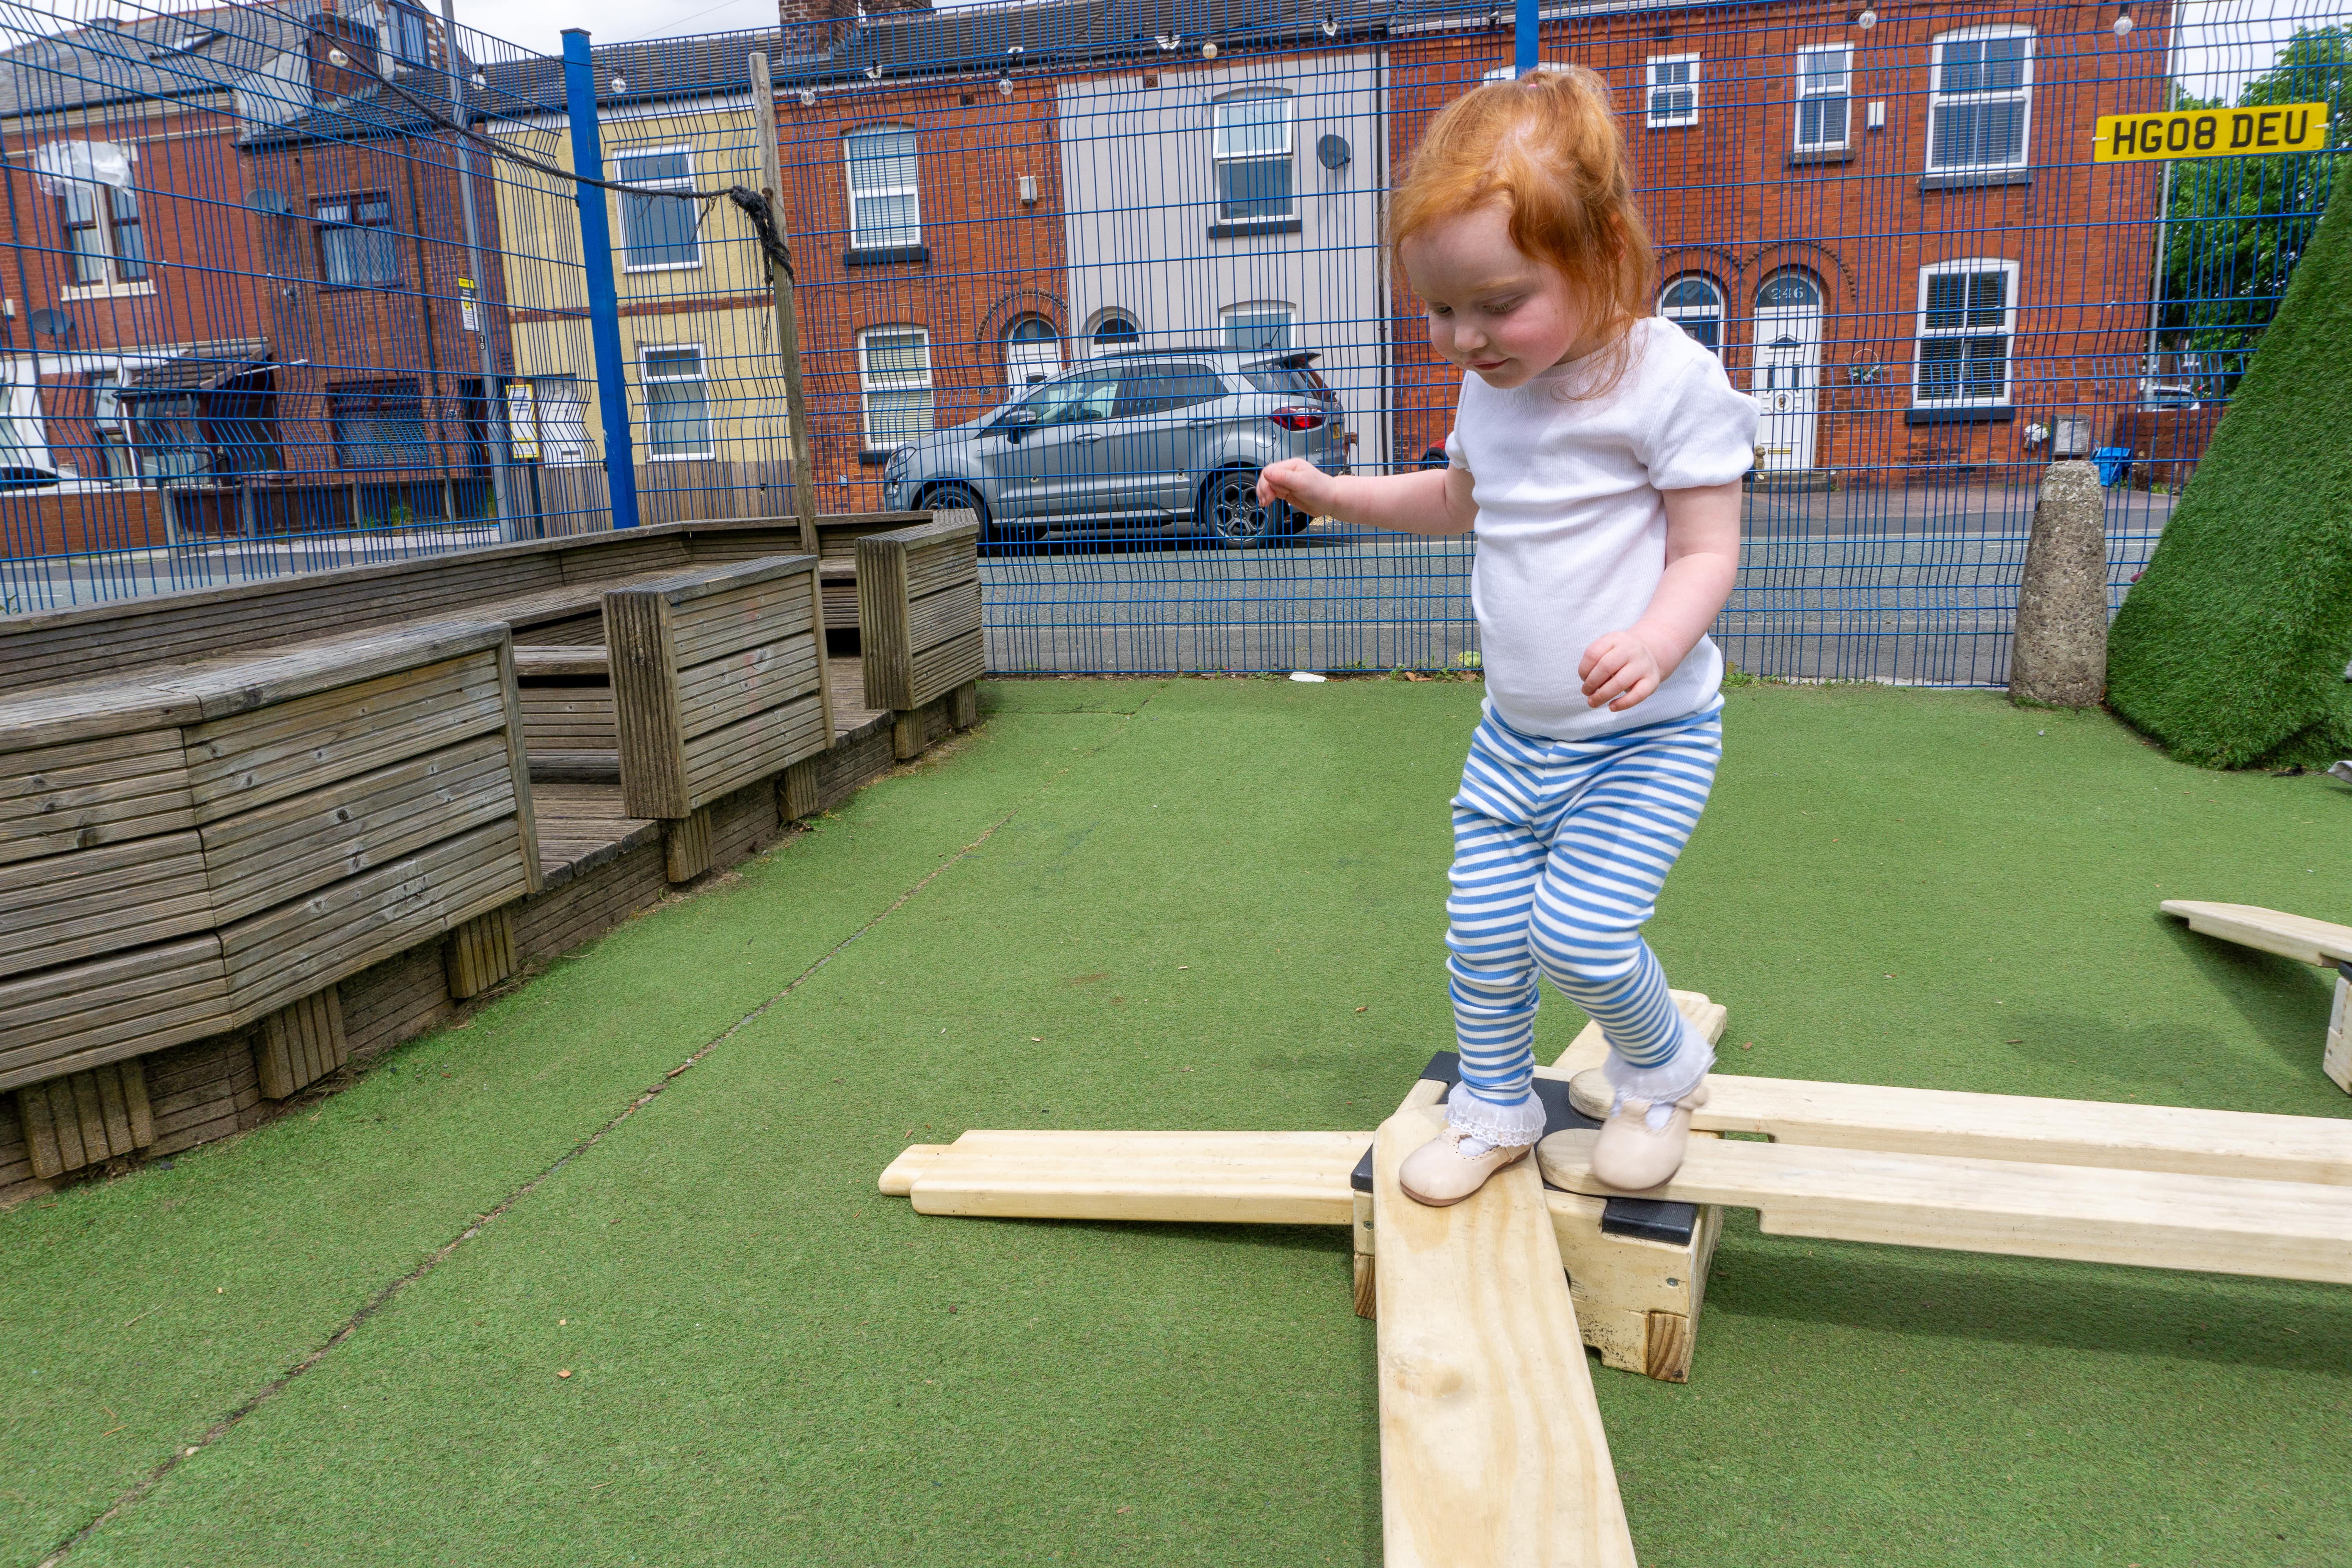 A little girl is walking across wooden planks and she is stood on a wooden block. She is looking down at her feet as she watches where she steps. She has a smile on her face as she engages with the equipment.